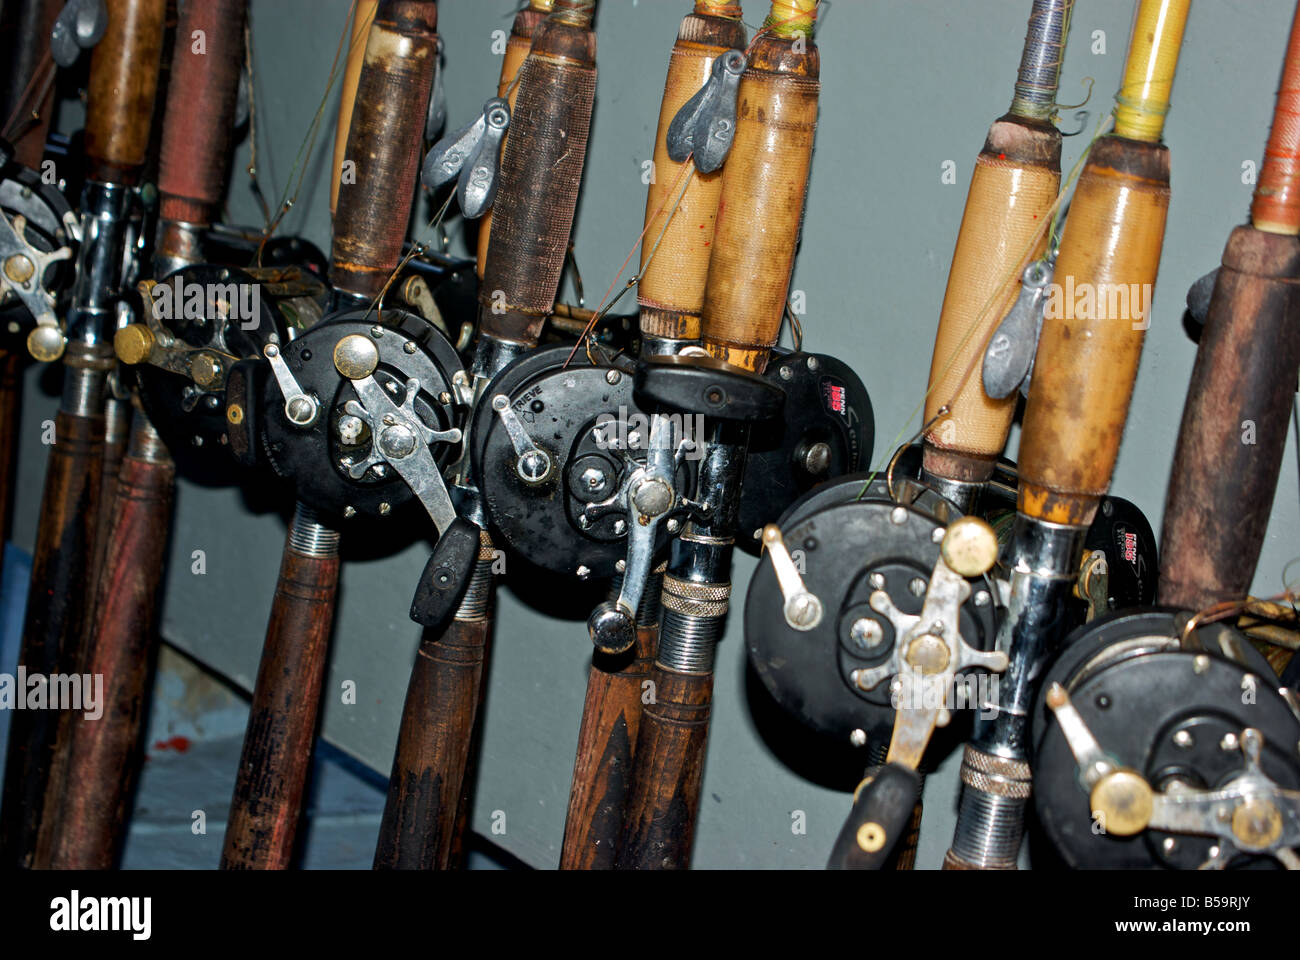 https://c8.alamy.com/comp/B59RJY/well-used-fishing-rods-and-reels-ready-to-use-on-a-party-fishing-boat-B59RJY.jpg